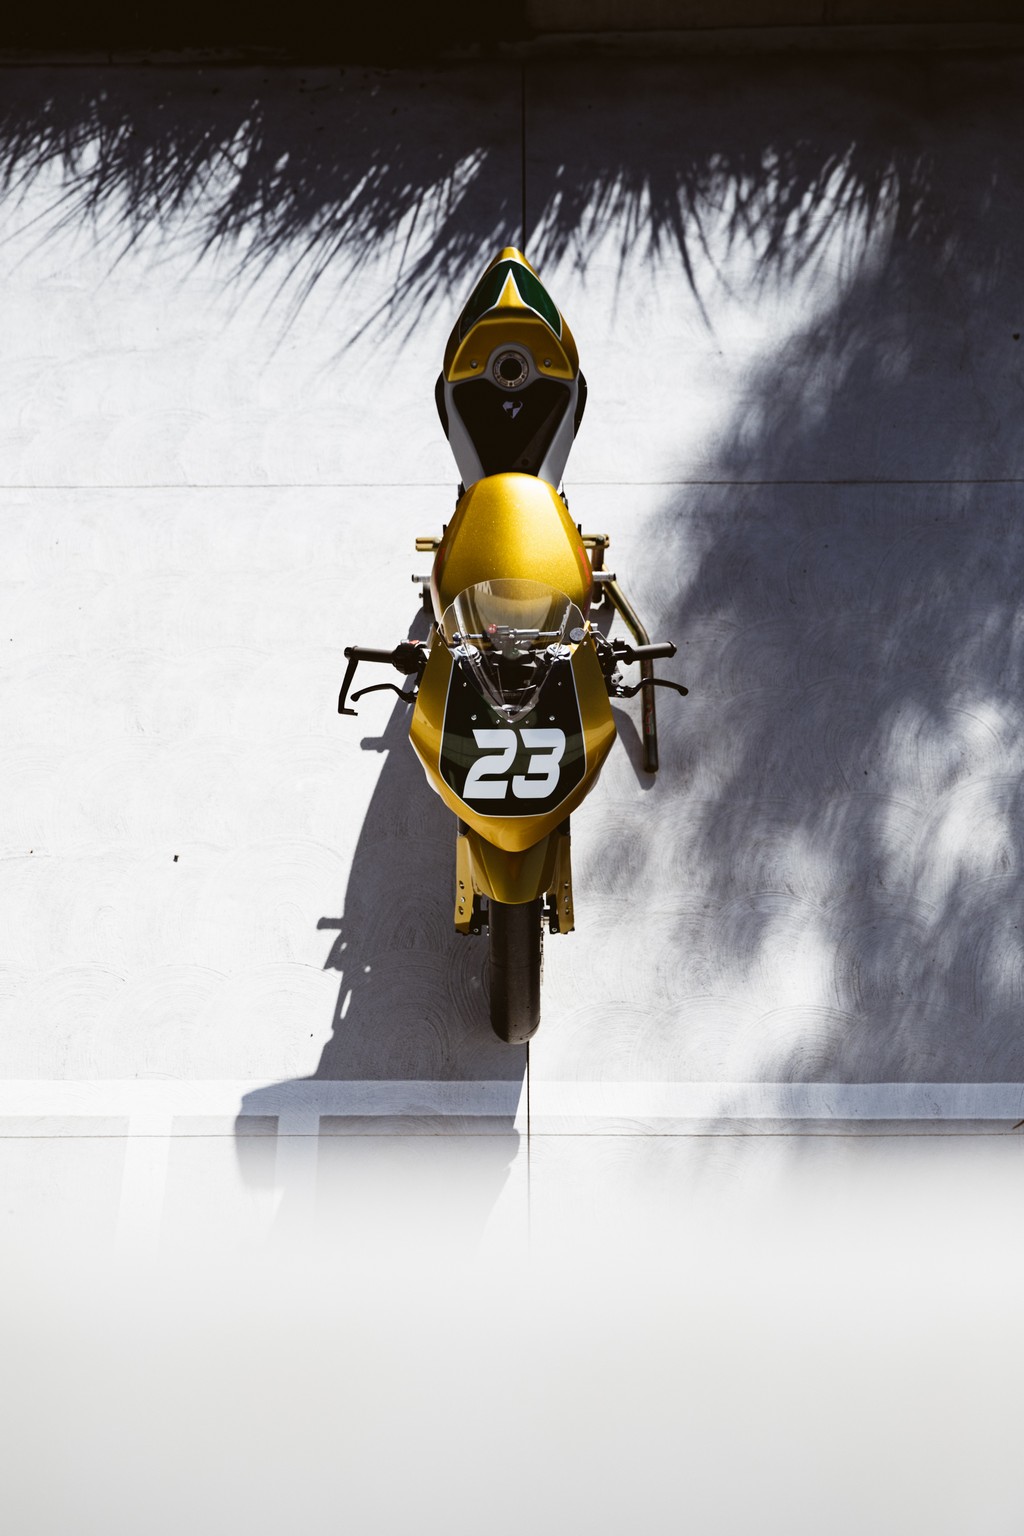 Top-down view of race motorcycle